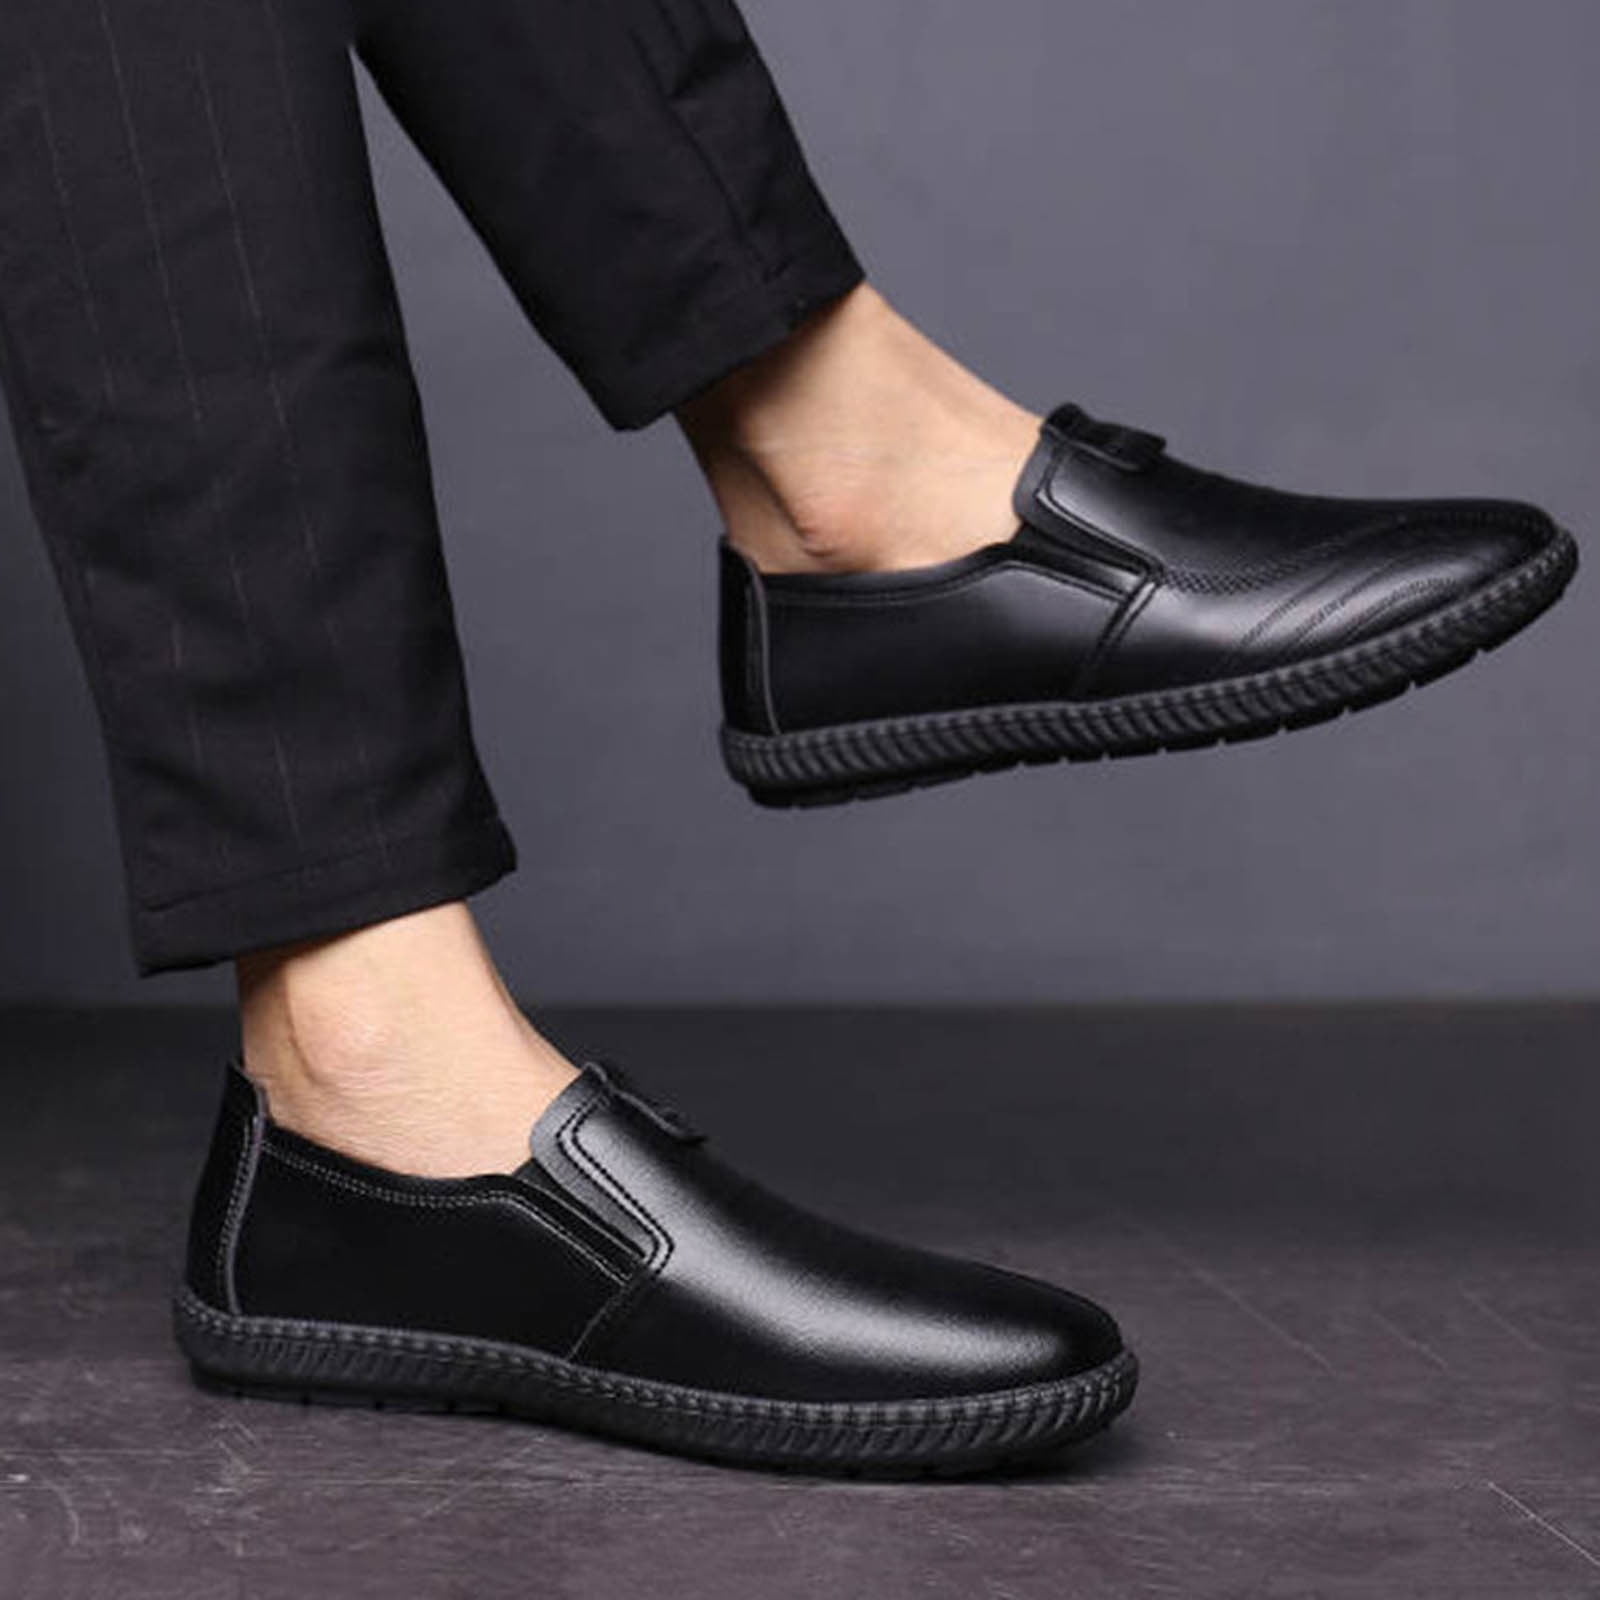 Ouneed New Comfortable Casual Shoes Peas Shoes Casual Shoes Men's Casual  Shoes